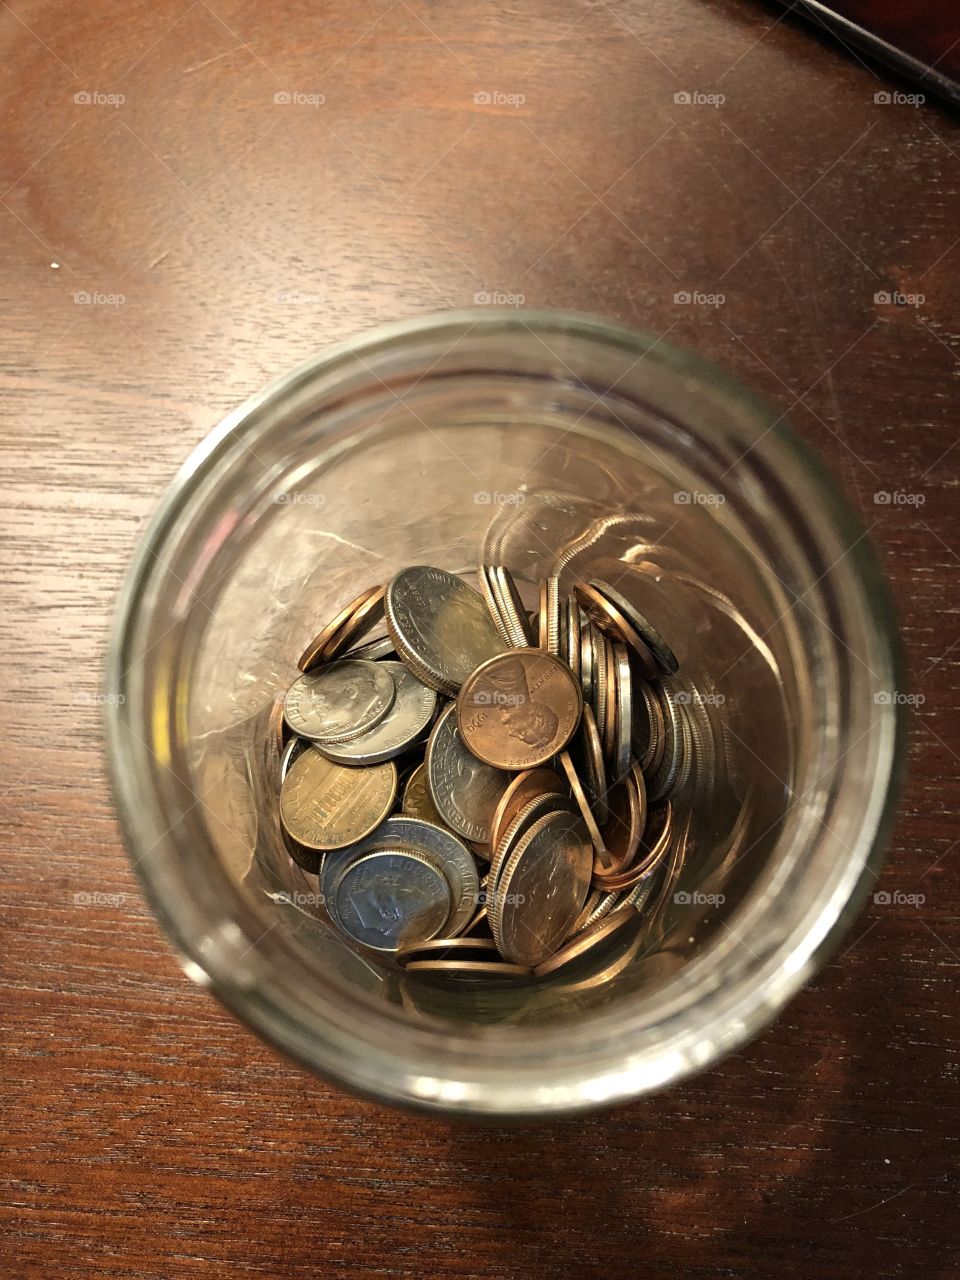 Saving money little by little by stashing pocket change in a jar. Every penny counts.